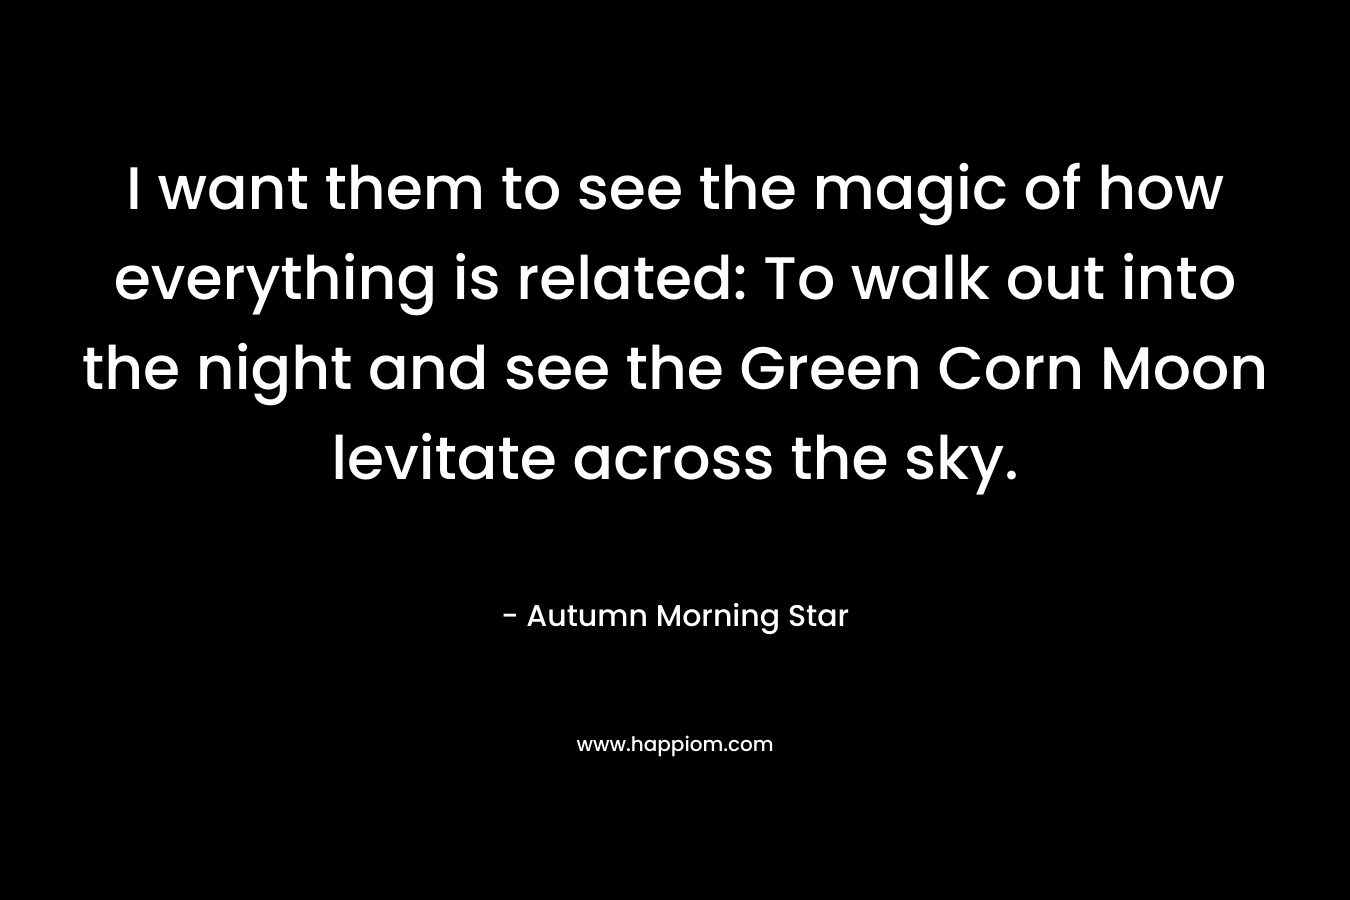 I want them to see the magic of how everything is related: To walk out into the night and see the Green Corn Moon levitate across the sky. – Autumn Morning Star